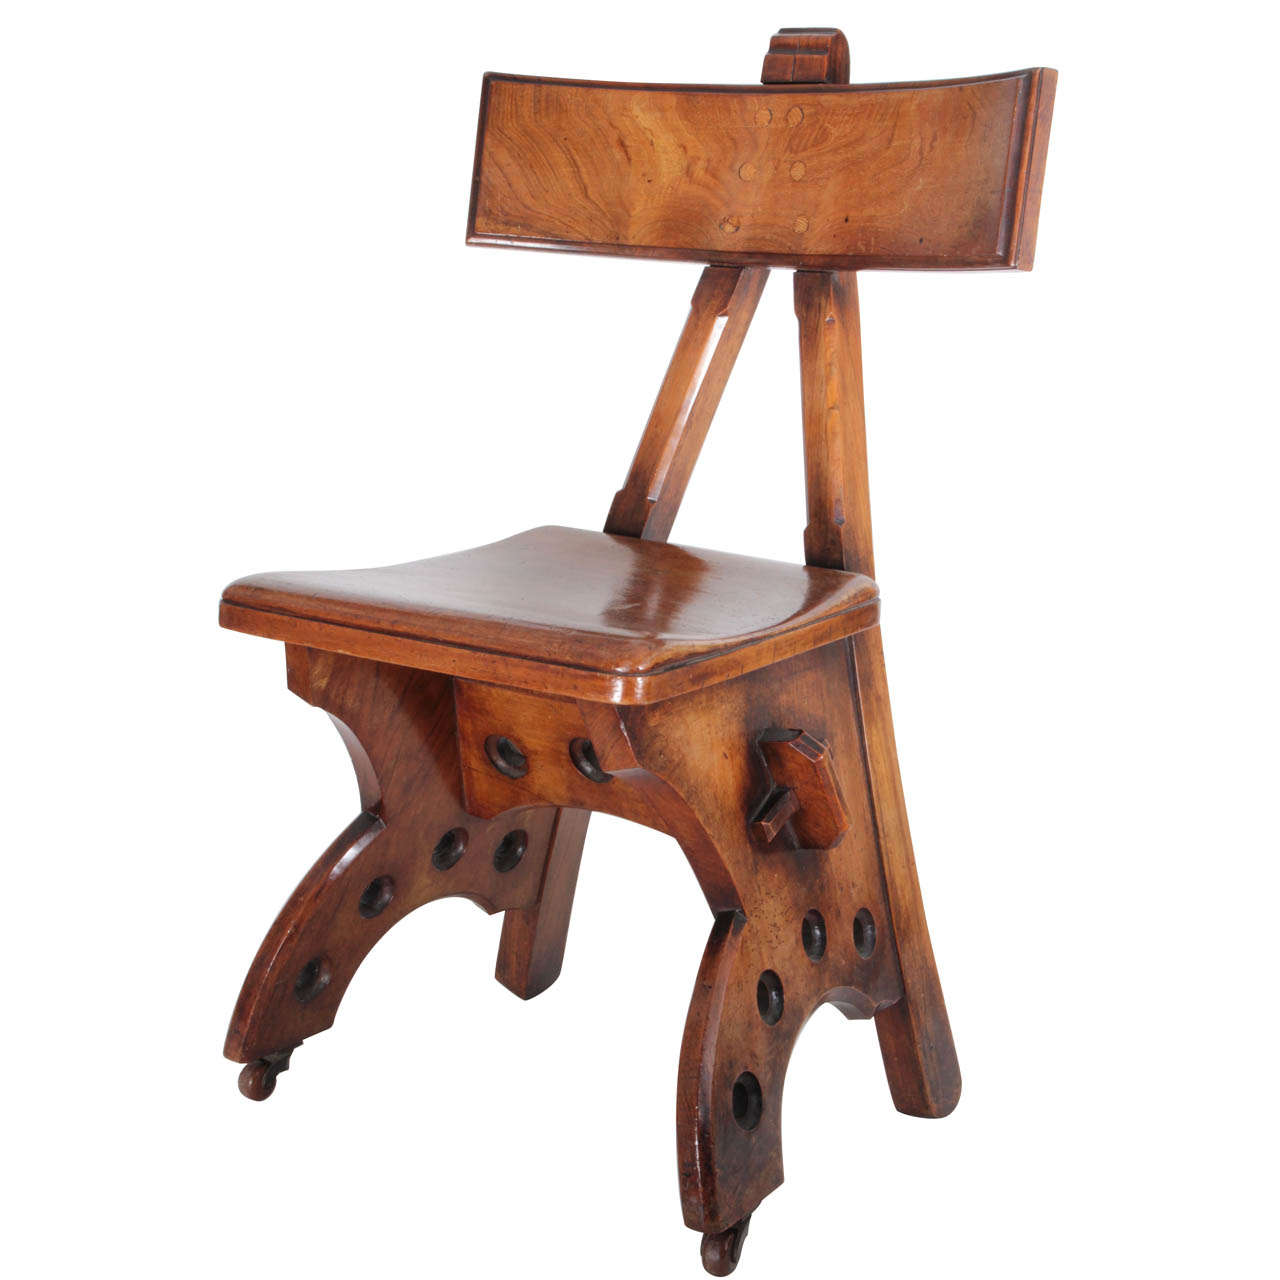 Edward Welby Pugin "Granville" early Arts & Crafts walnut chair c. 1870 For Sale